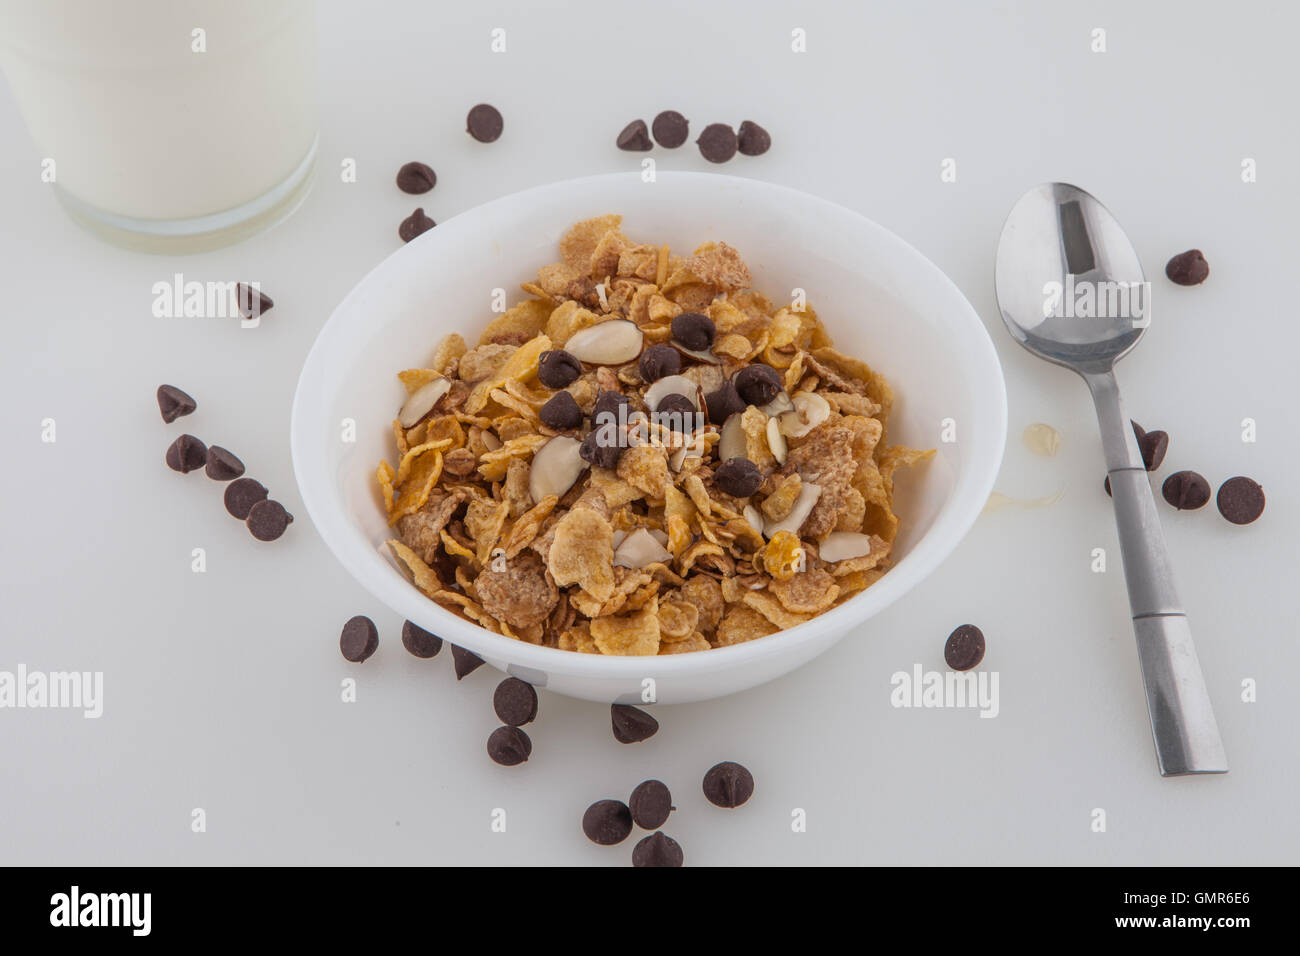 Breakfast cereal honey almond and oats chocolate chips spoon glass of milk Stock Photo